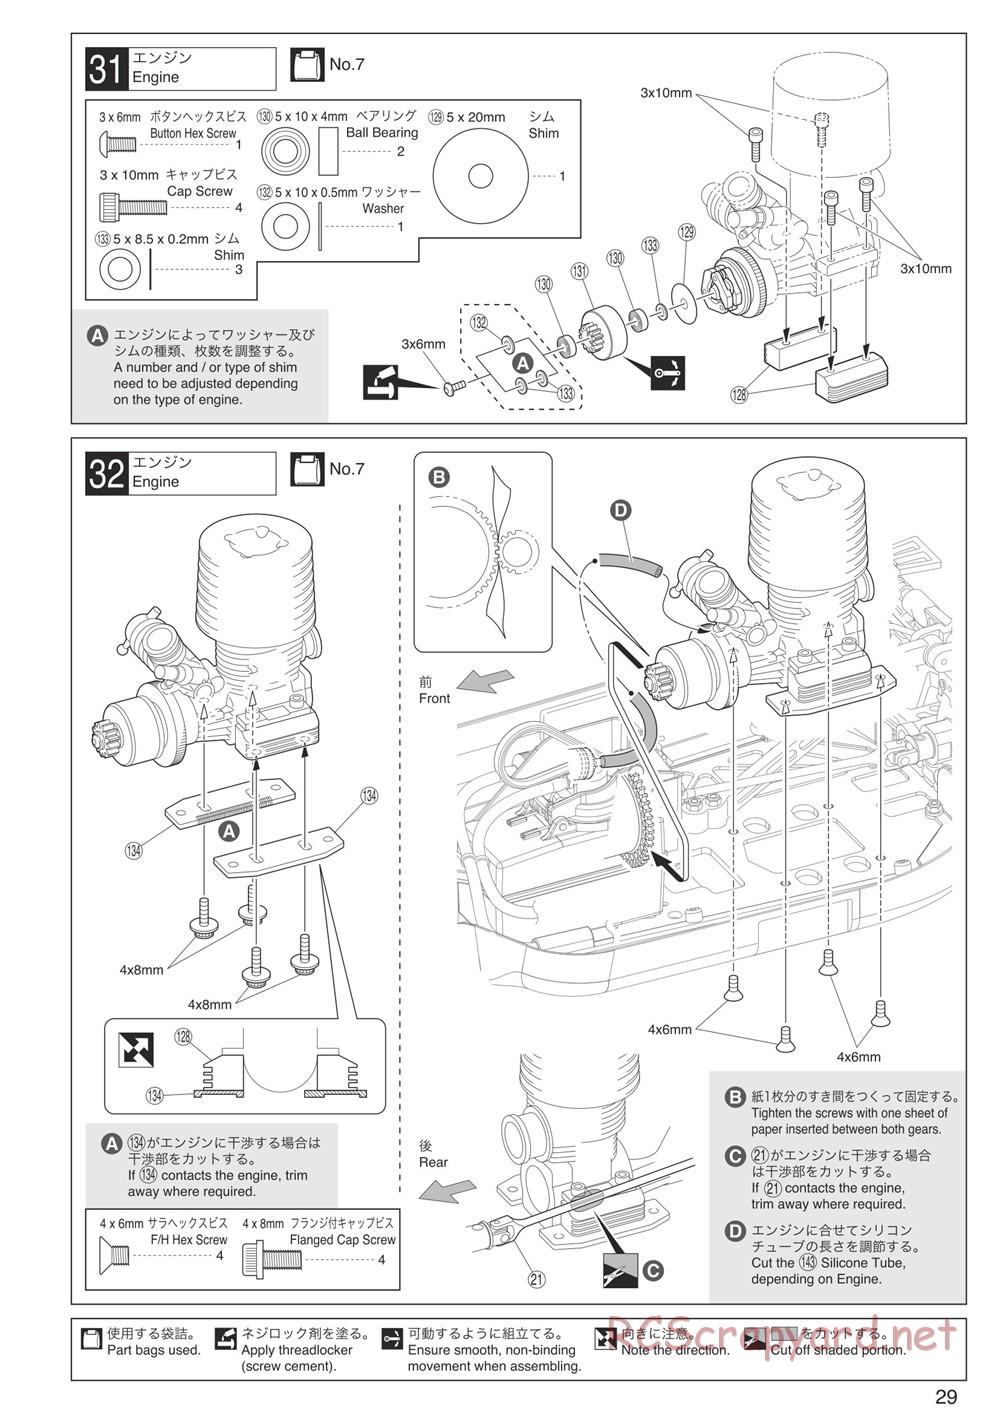 Kyosho - Inferno MP9 TKI4 10th Anniversary Special Edition - Manual - Page 29